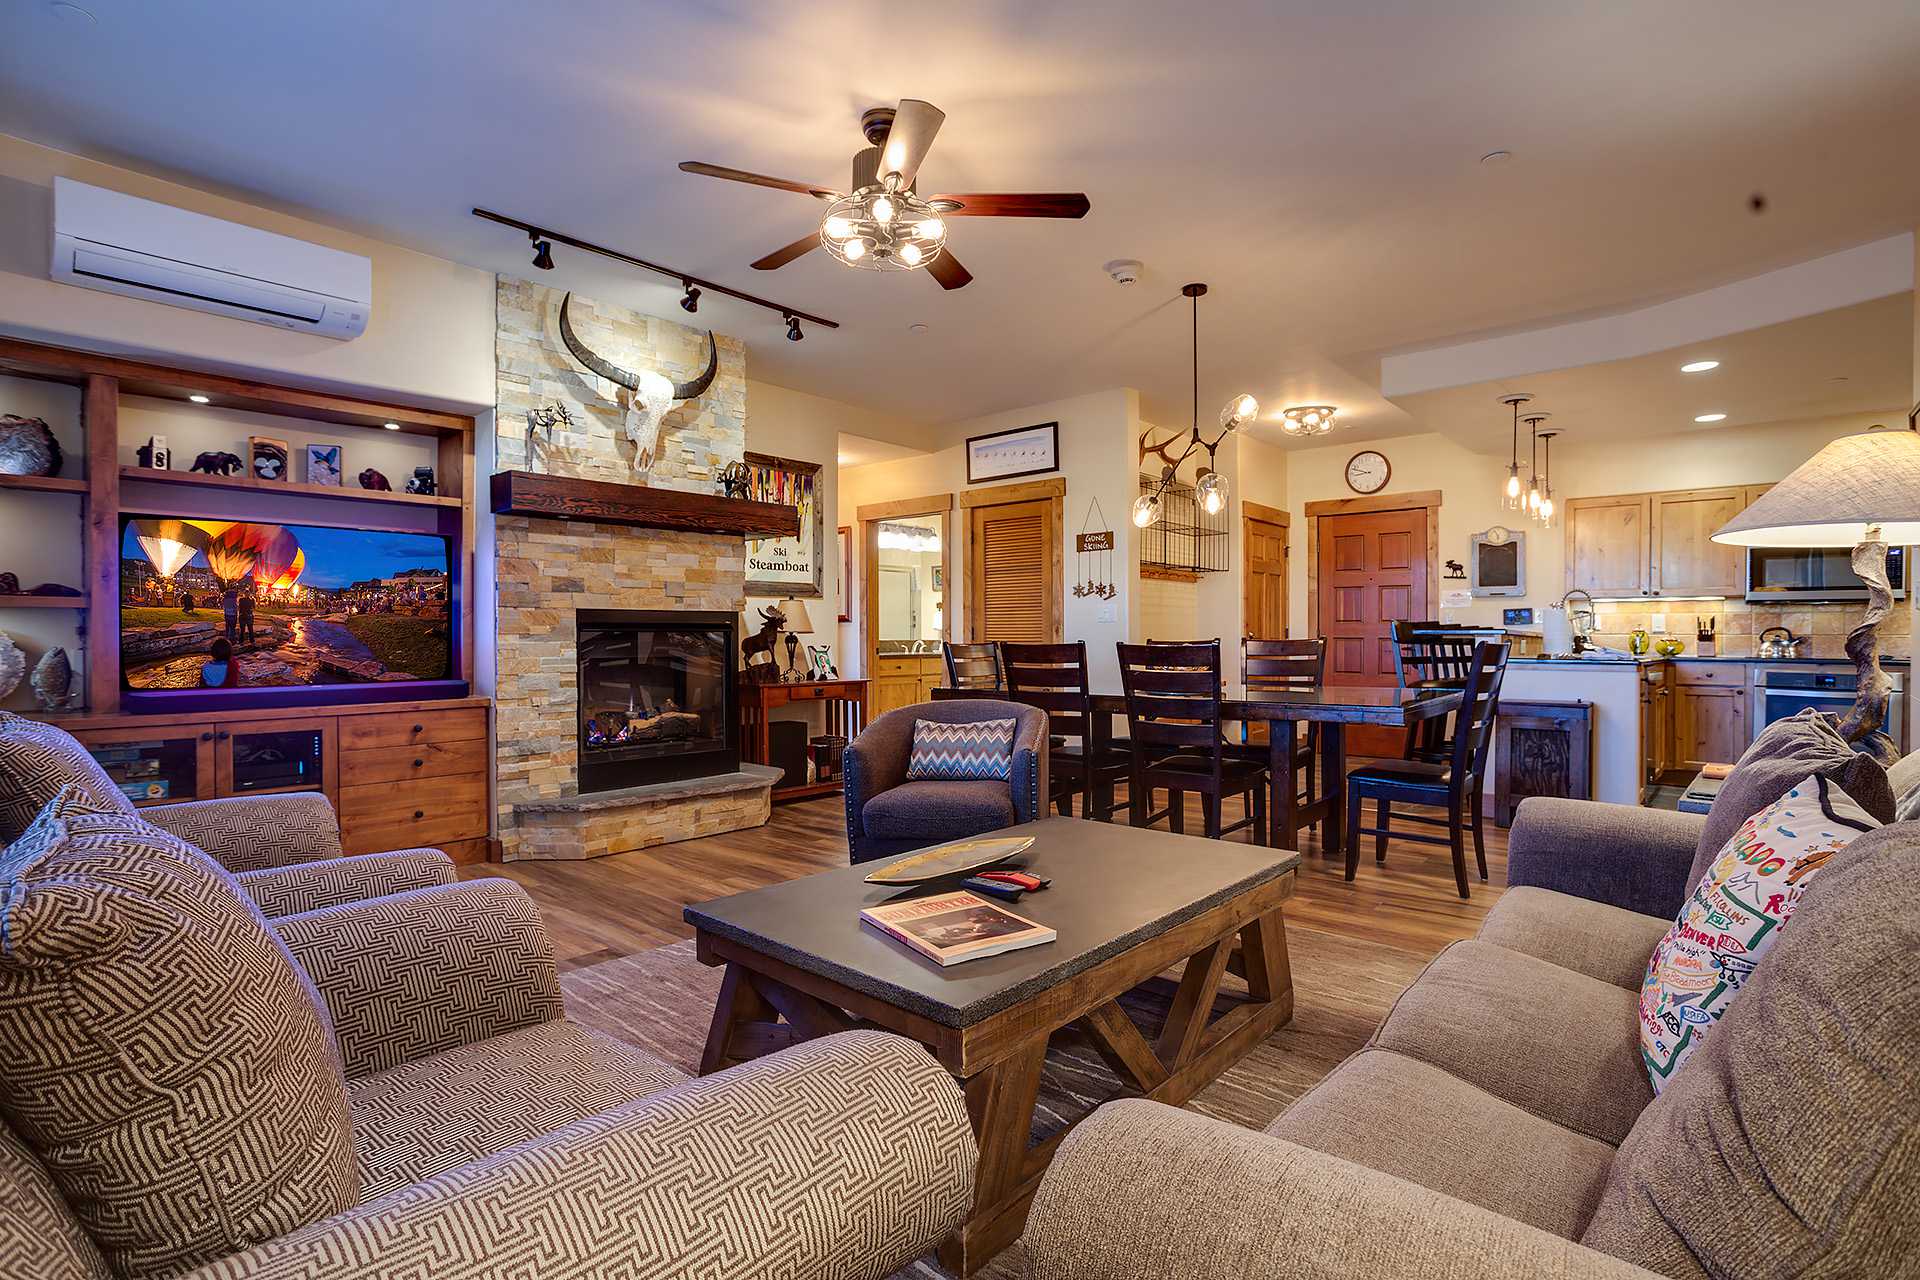 CL3110 by Simply Steamboat: Gorgeous Mountain Home with Updates!